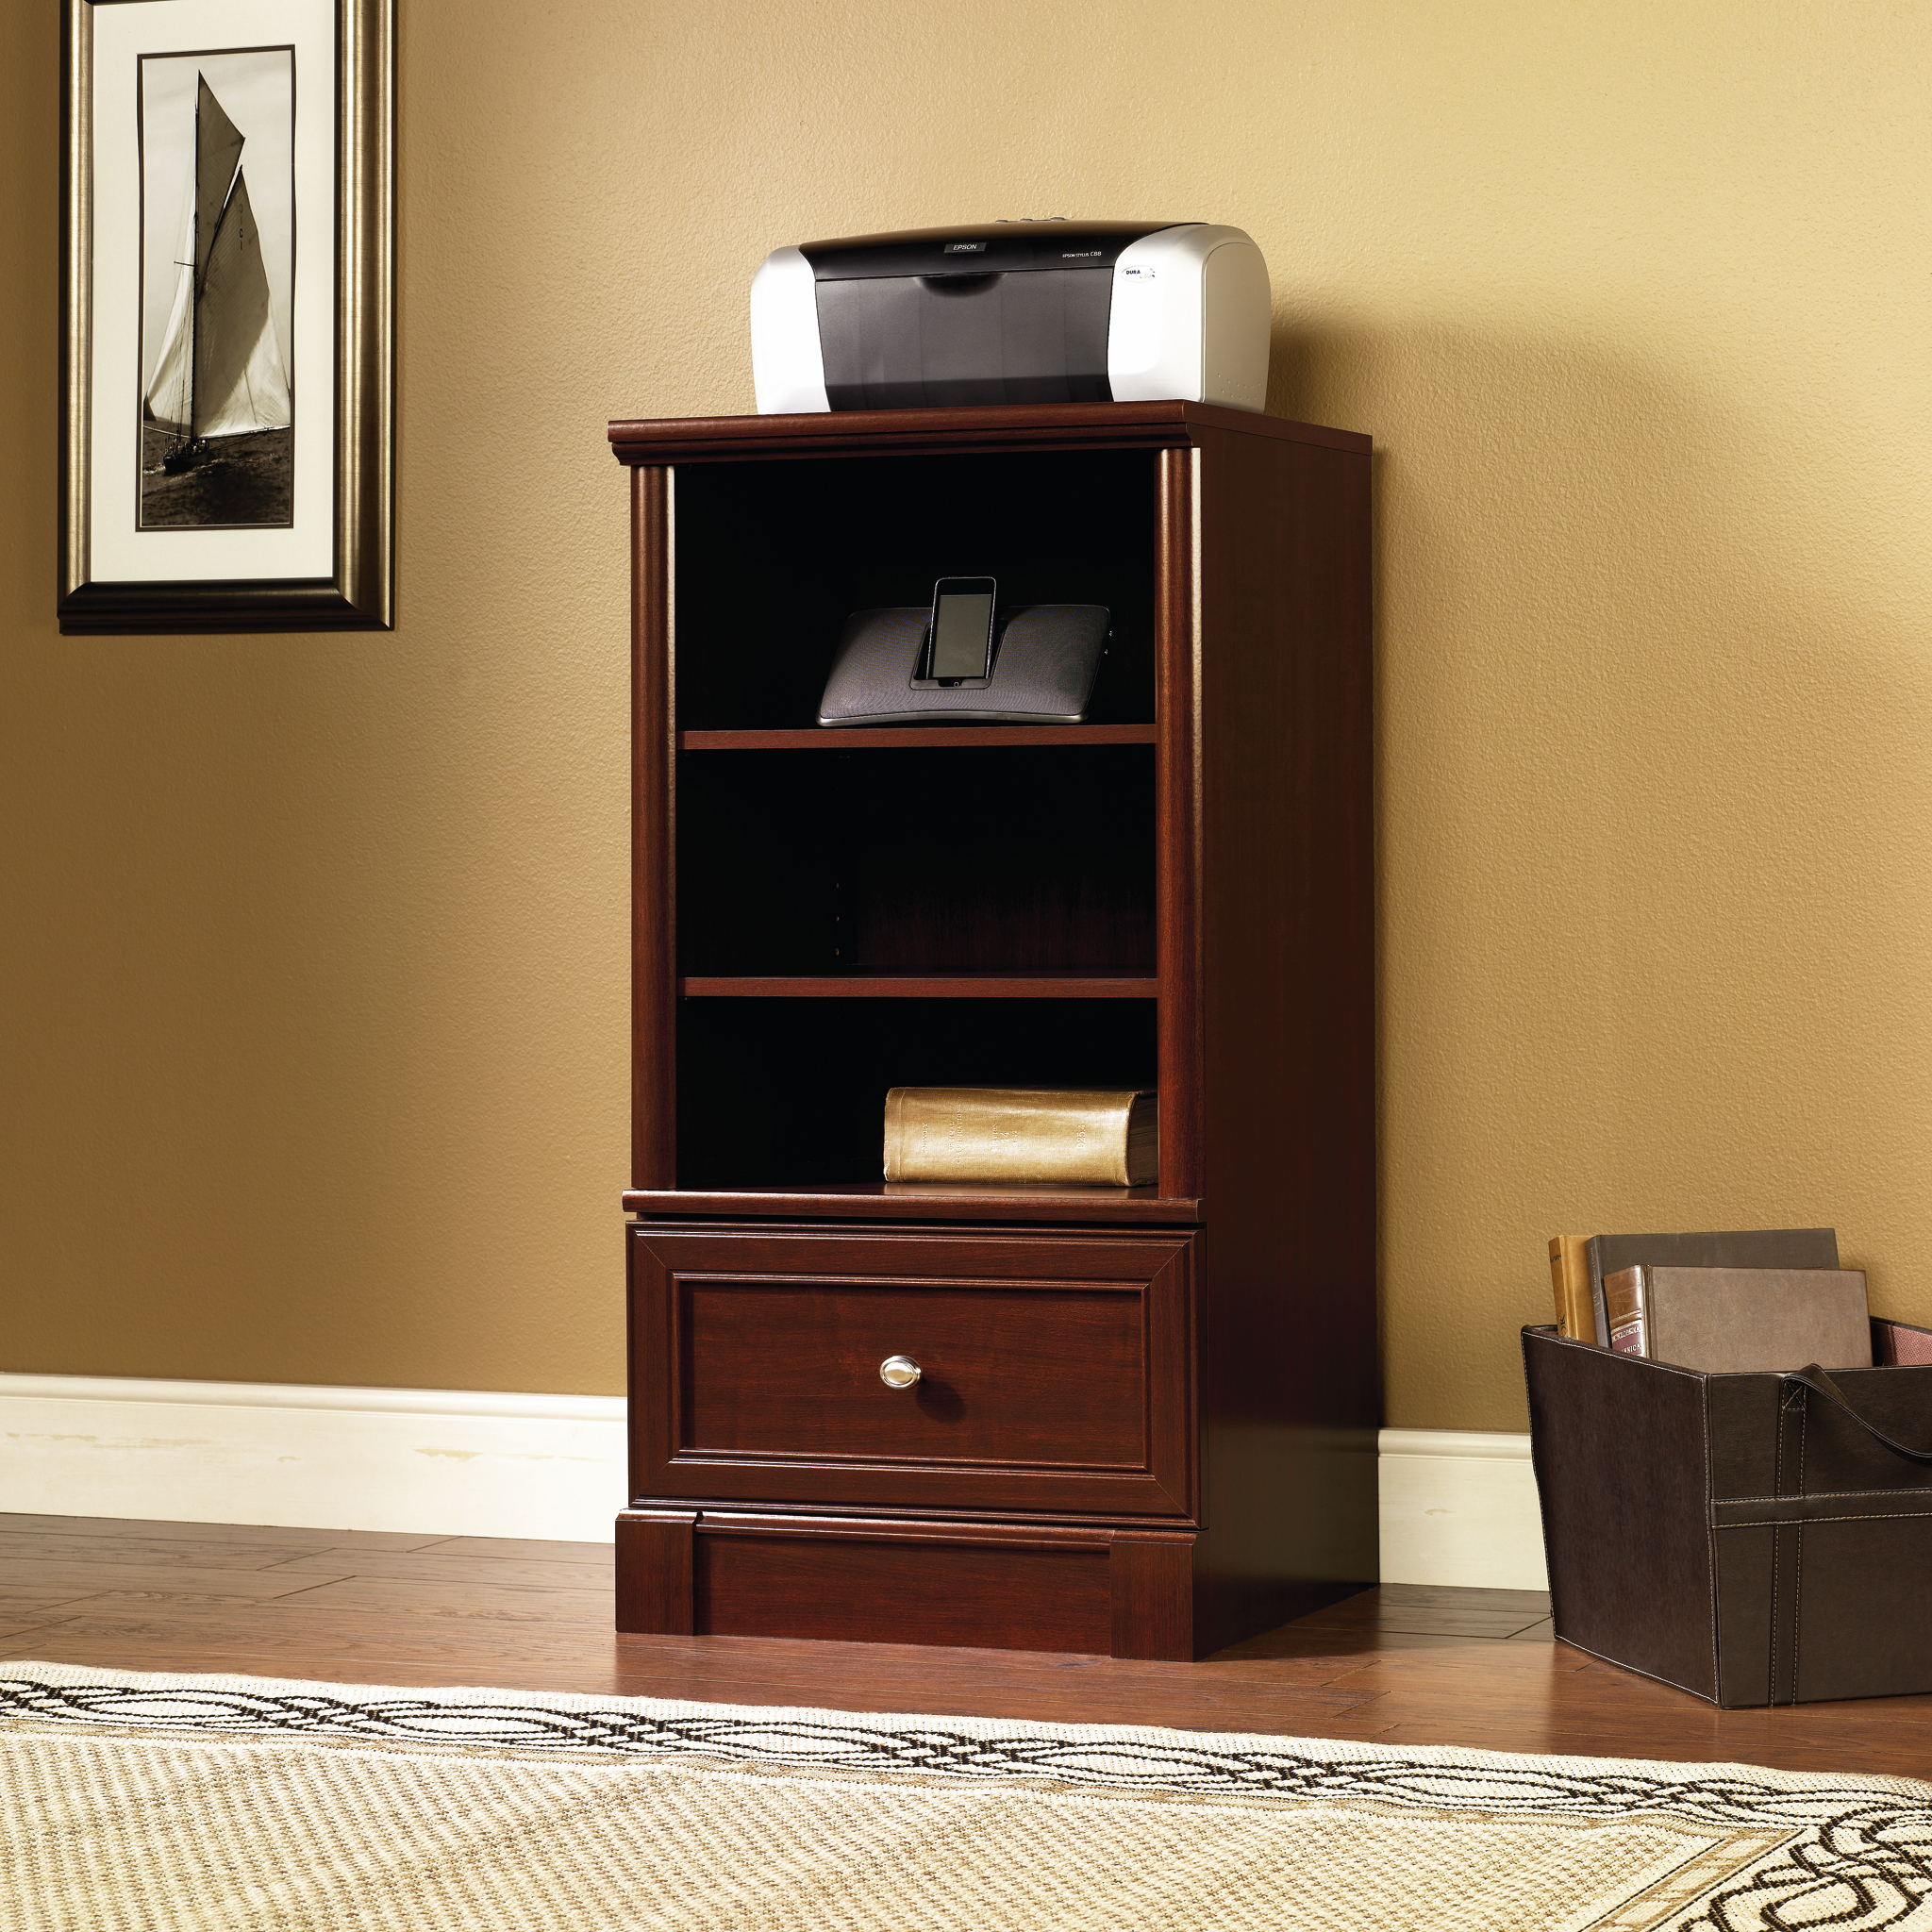 Sauder Tv Stand with Fireplace Awesome Sauder Palladia Audio Media tower Select Cherry Finish